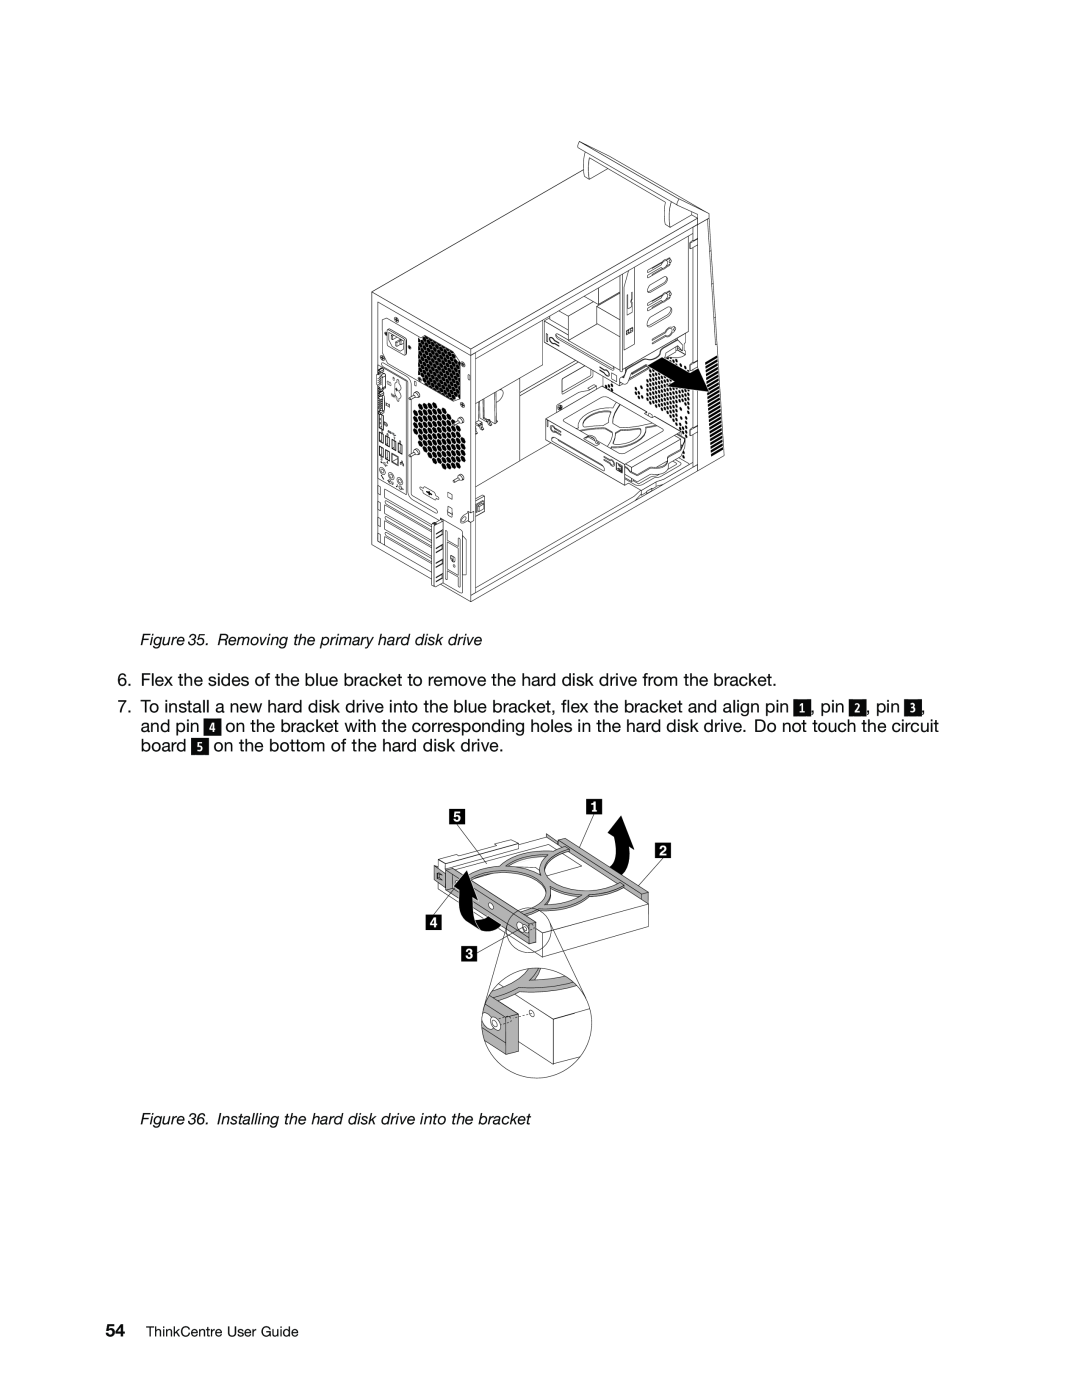 Lenovo 1662, 2112, 2111, 2110, 2011, 1663, 1565, 1562, 1766, 1765 Removing the primary hard disk drive, 54ThinkCentre User Guide 